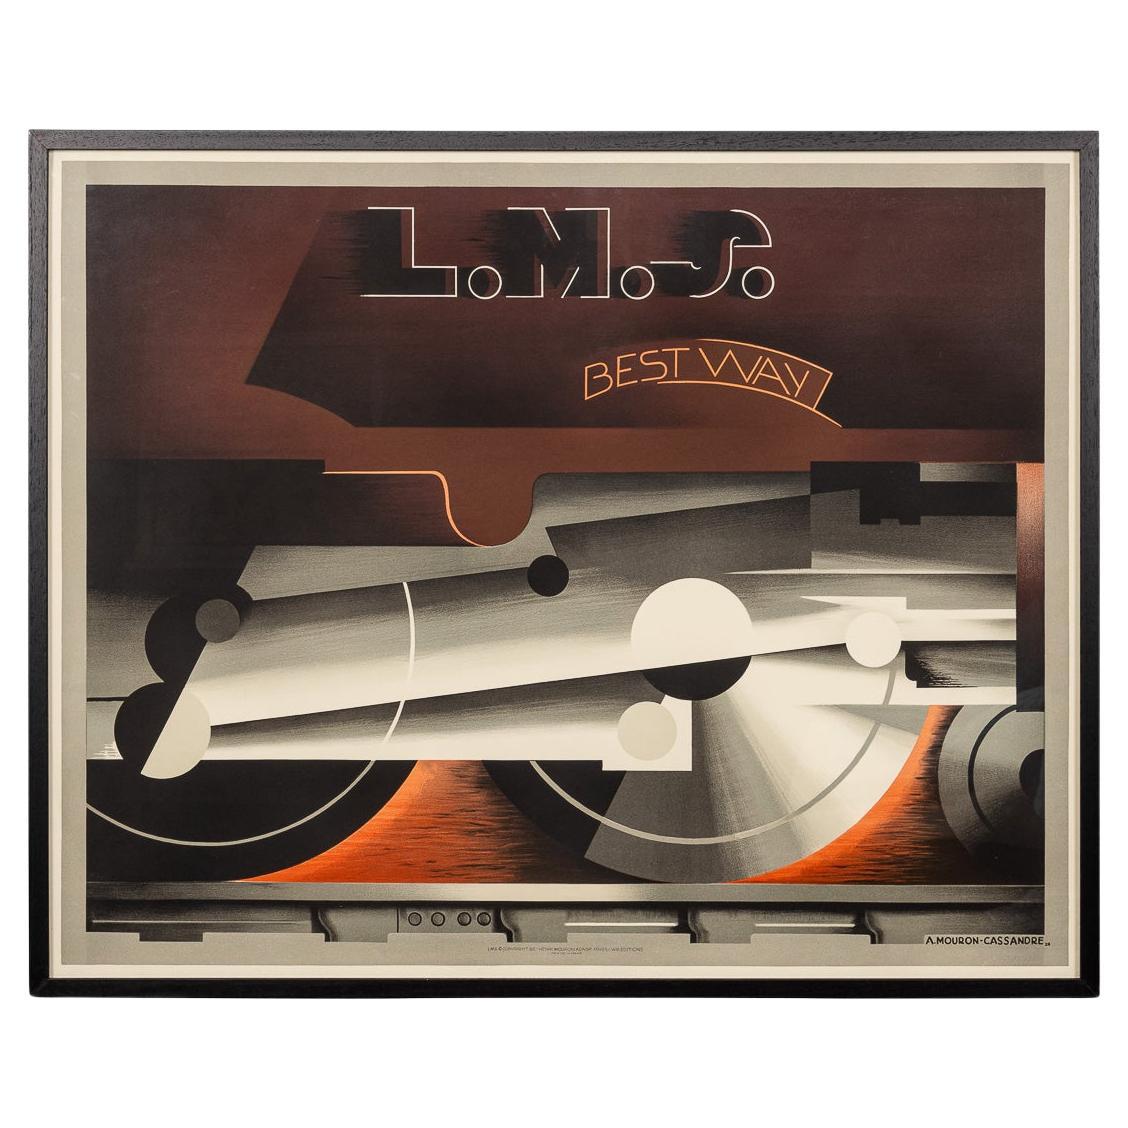 20th Century French Made Lms "Best Way" Poster By Henri Mouron Adagp, Paris For Sale